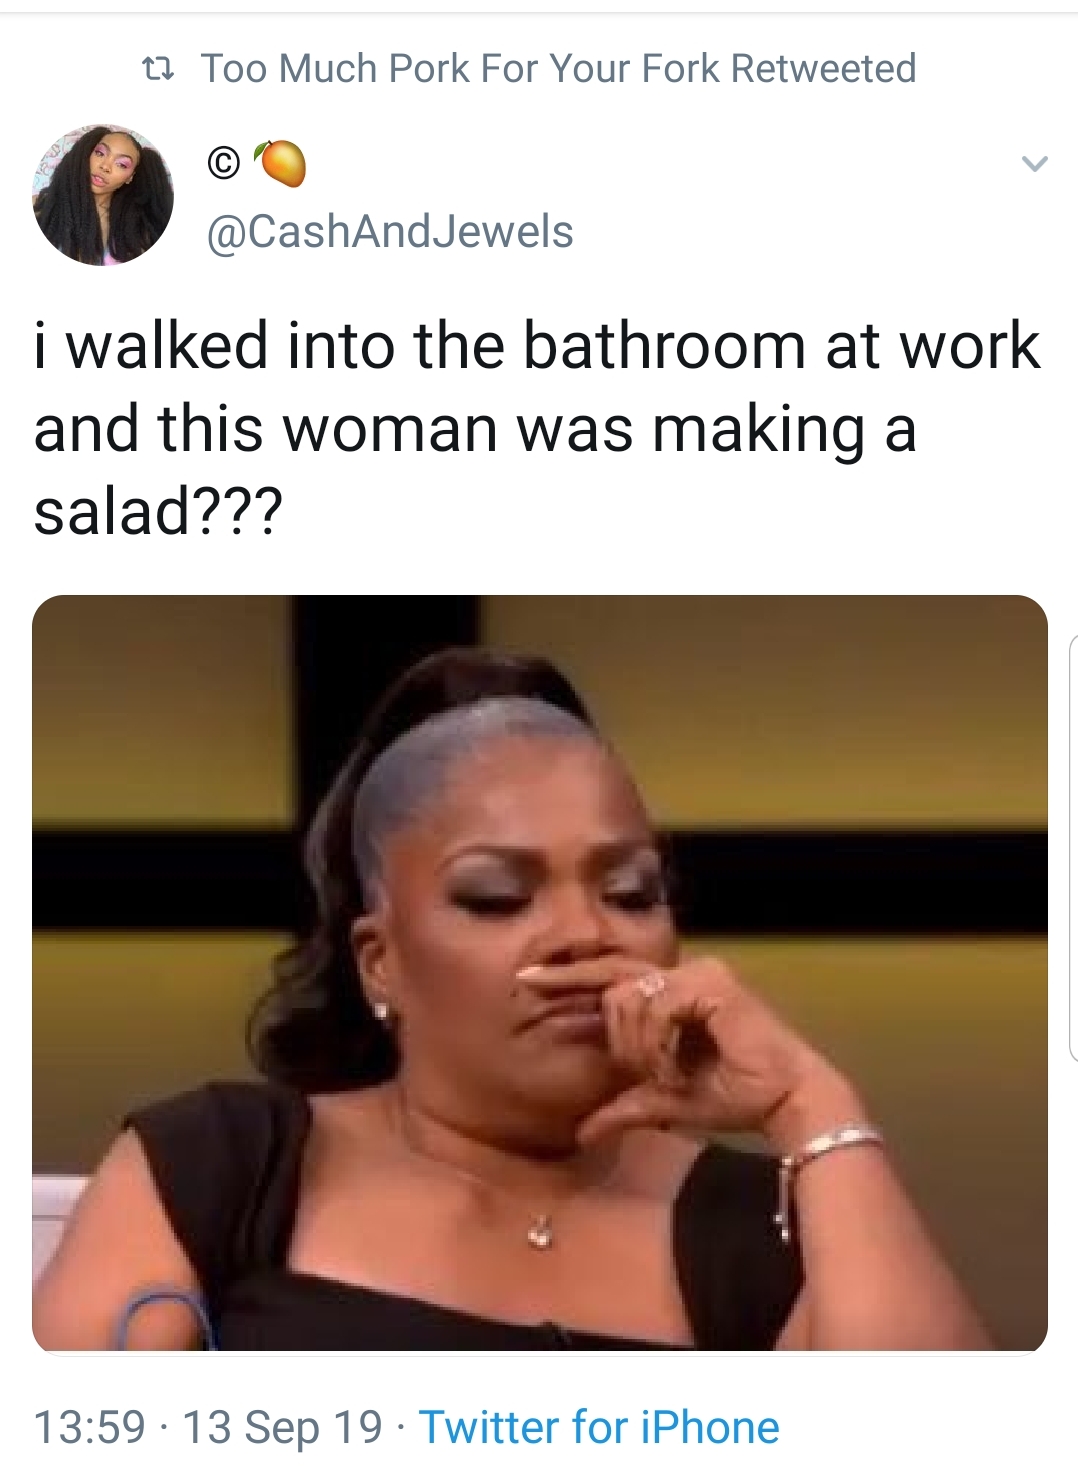 clownery meme - t1 Too Much Pork For Your Fork Retweeted Jewels i walked into the bathroom at work and this woman was making a salad??? 13 Sep 19. Twitter for iPhone